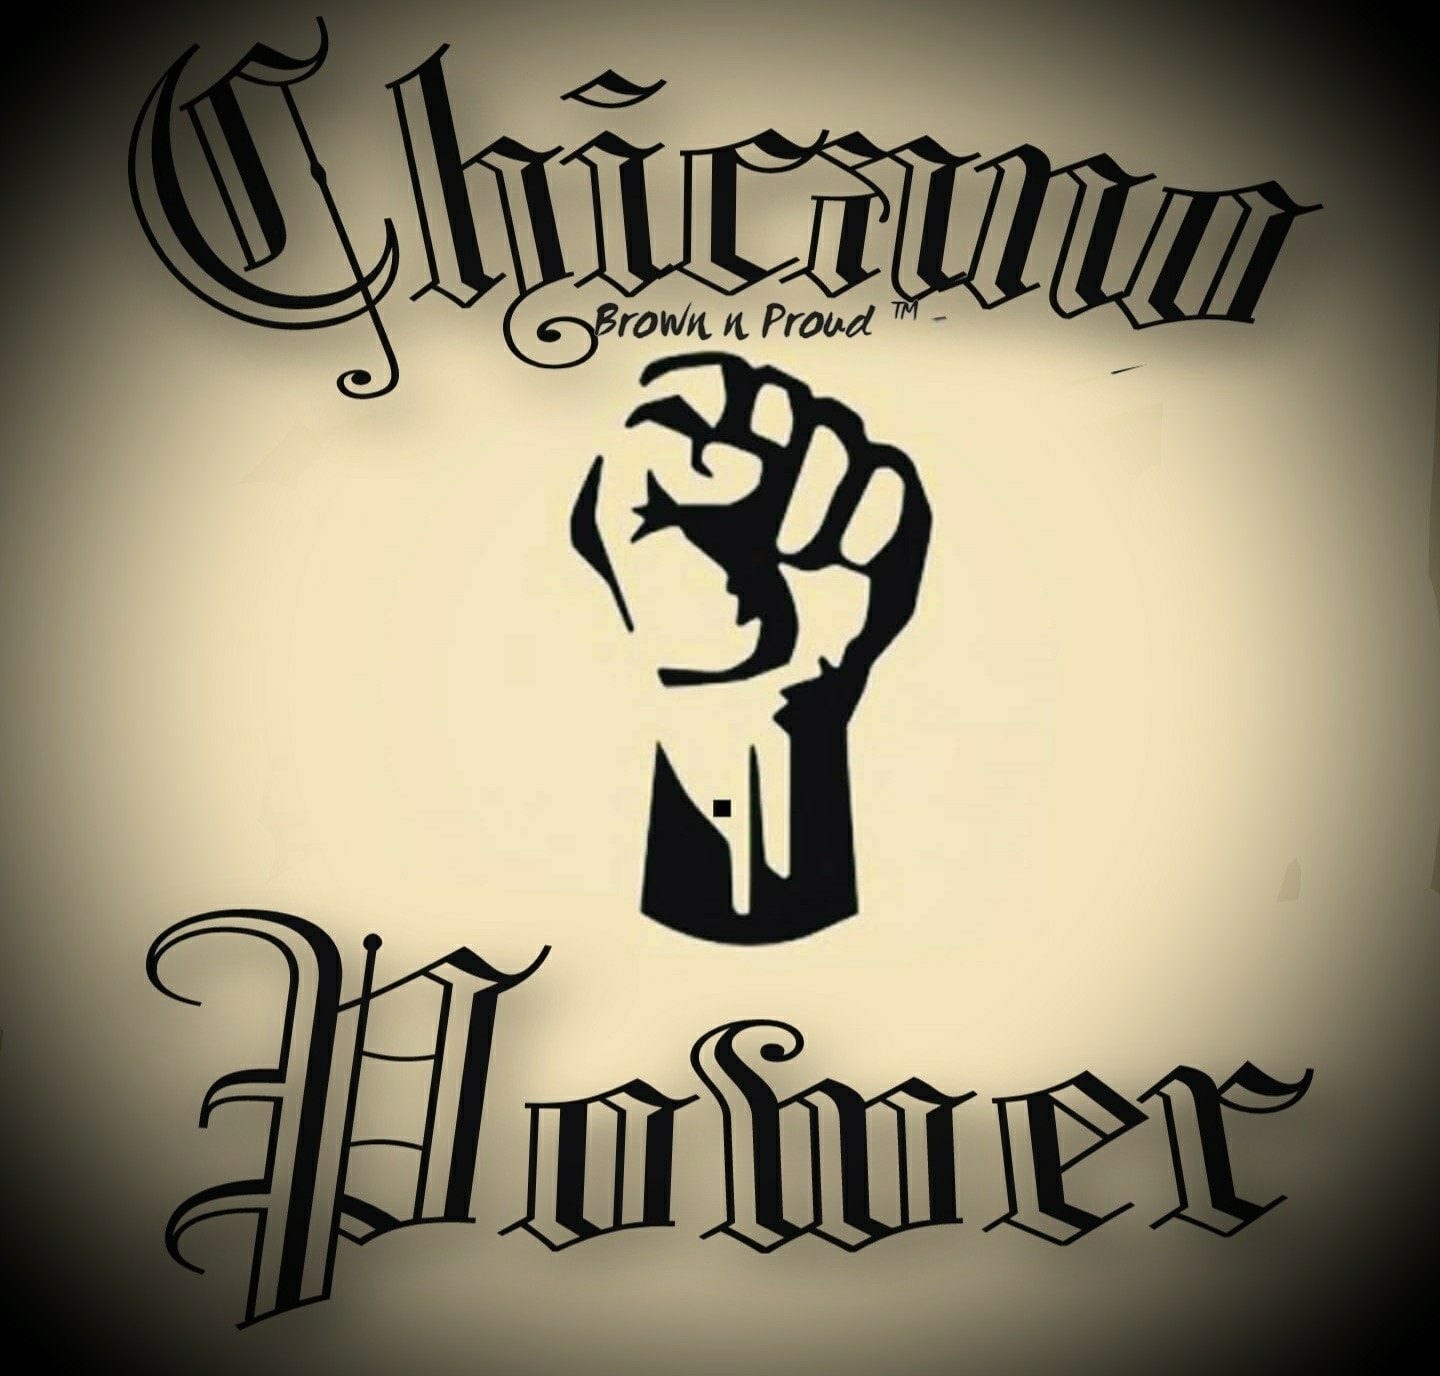 poster - Chictunun Brown n Proud Puluer